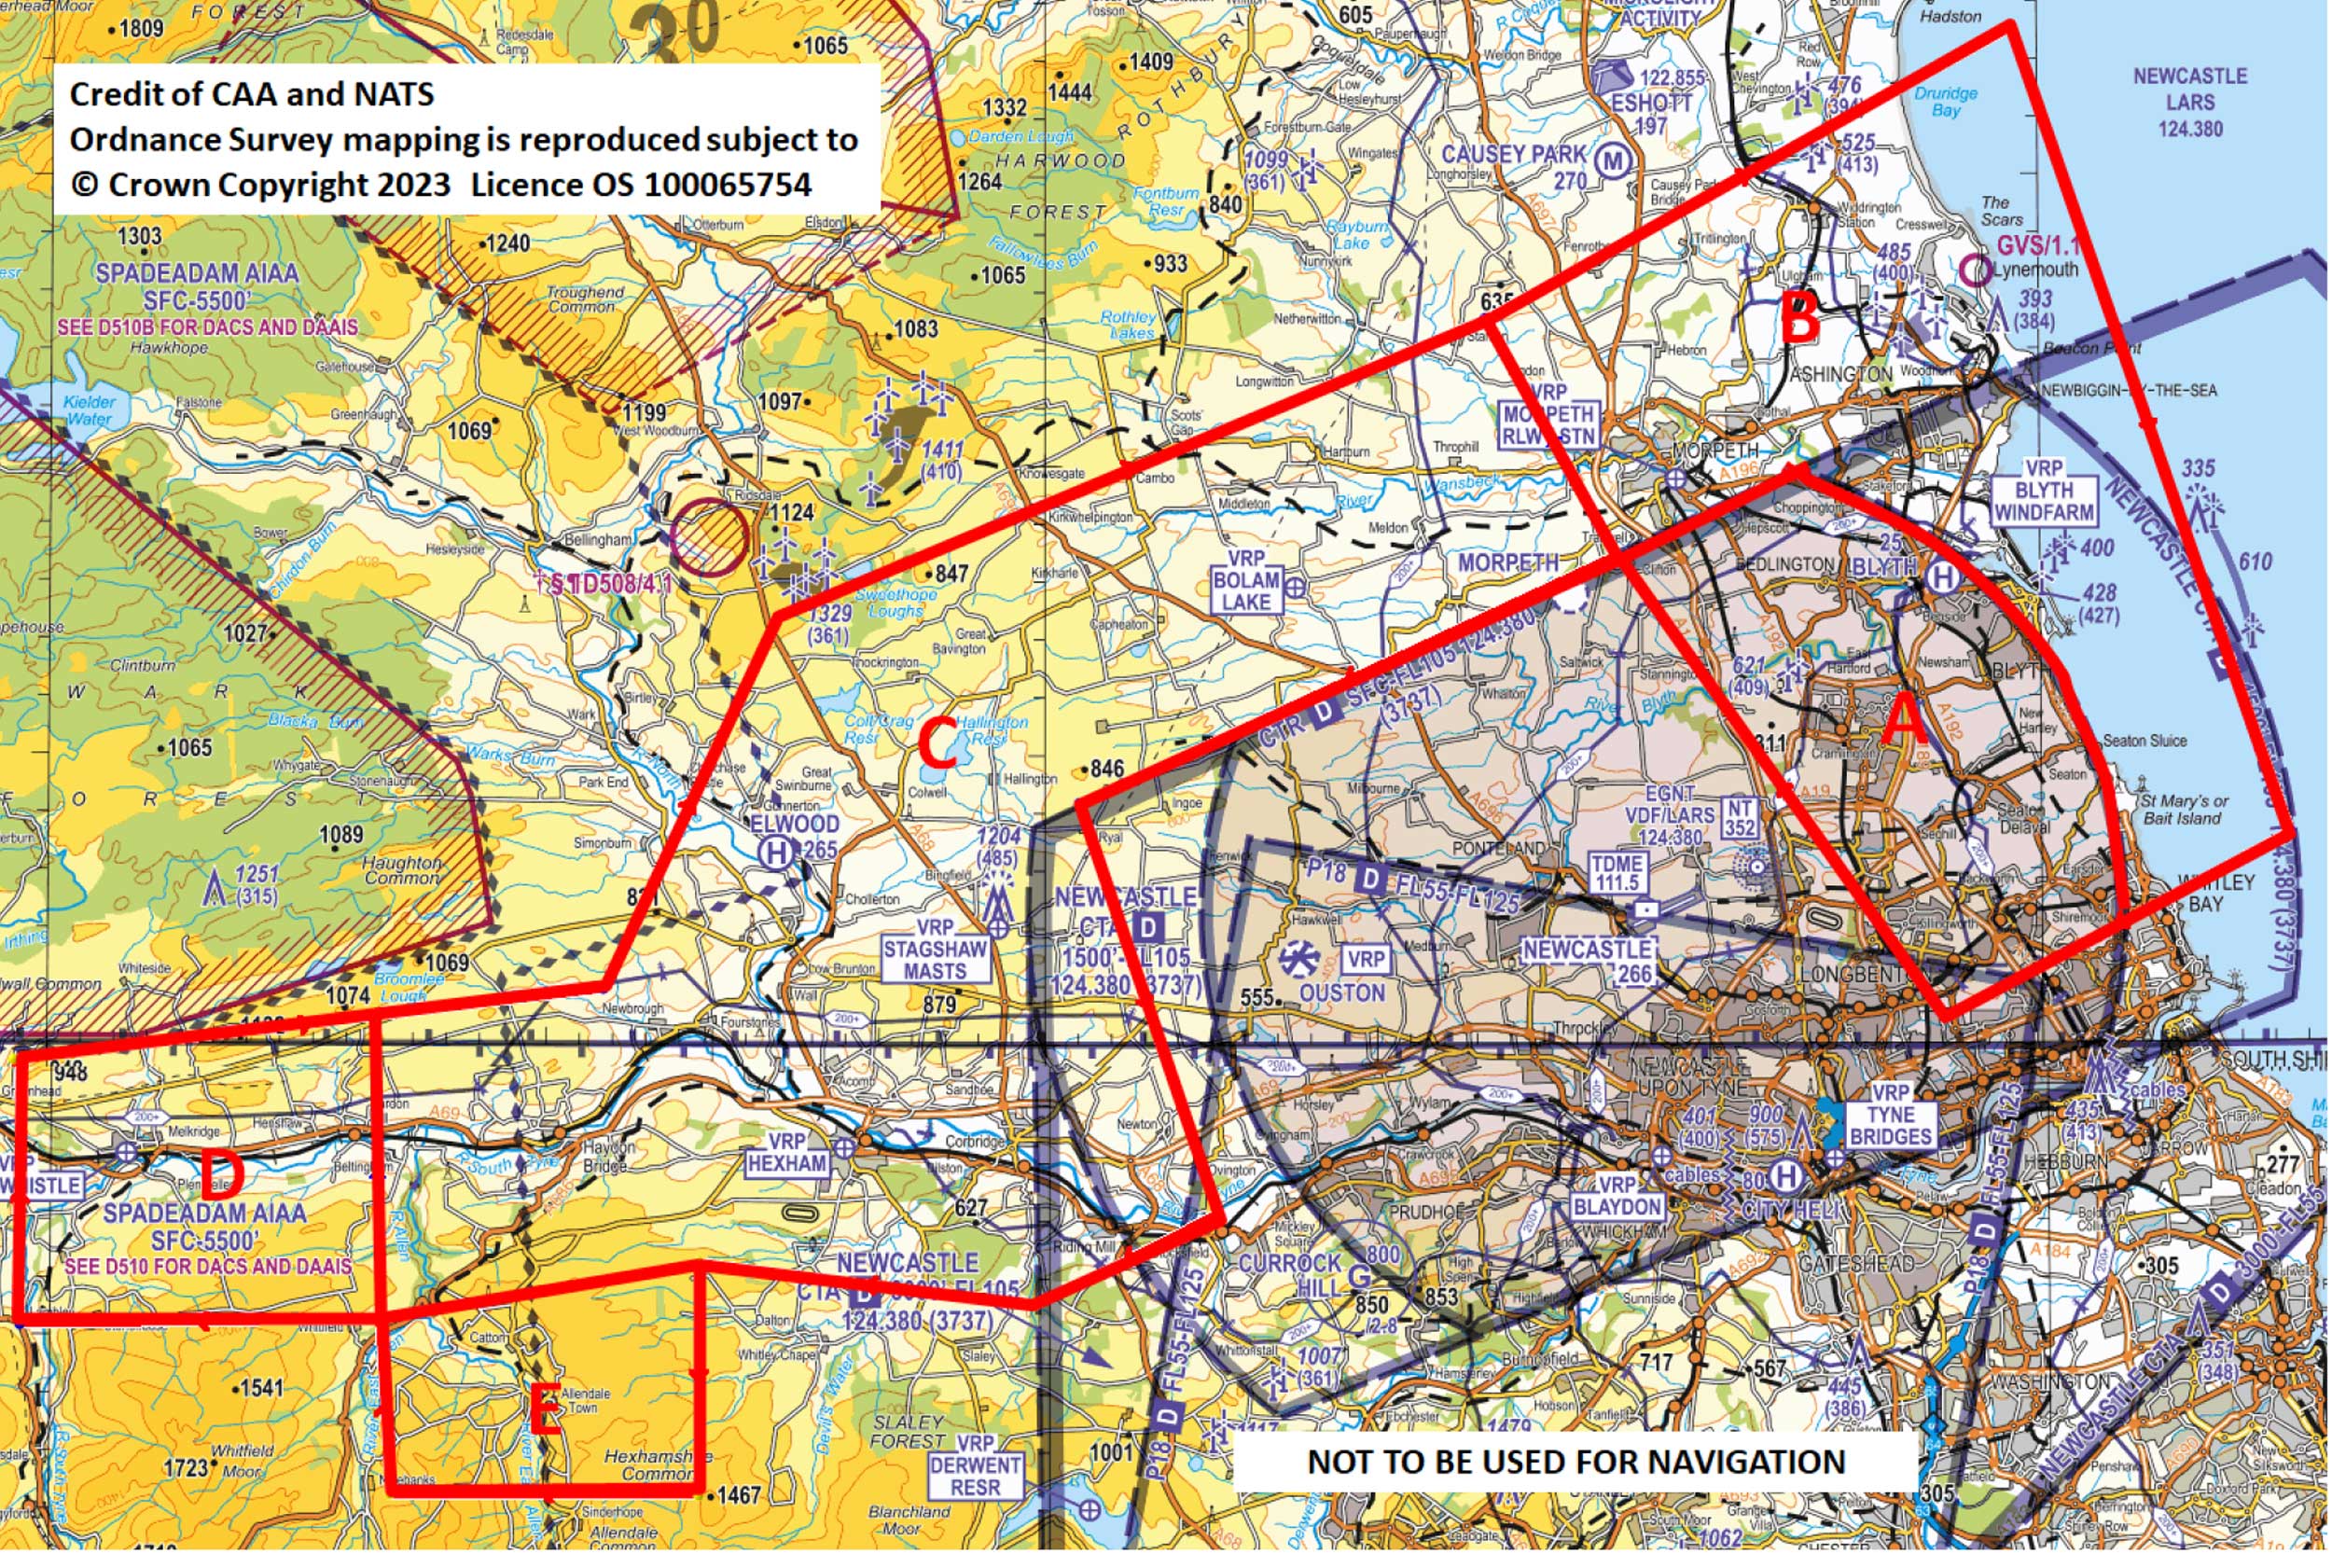 North-East airspace change